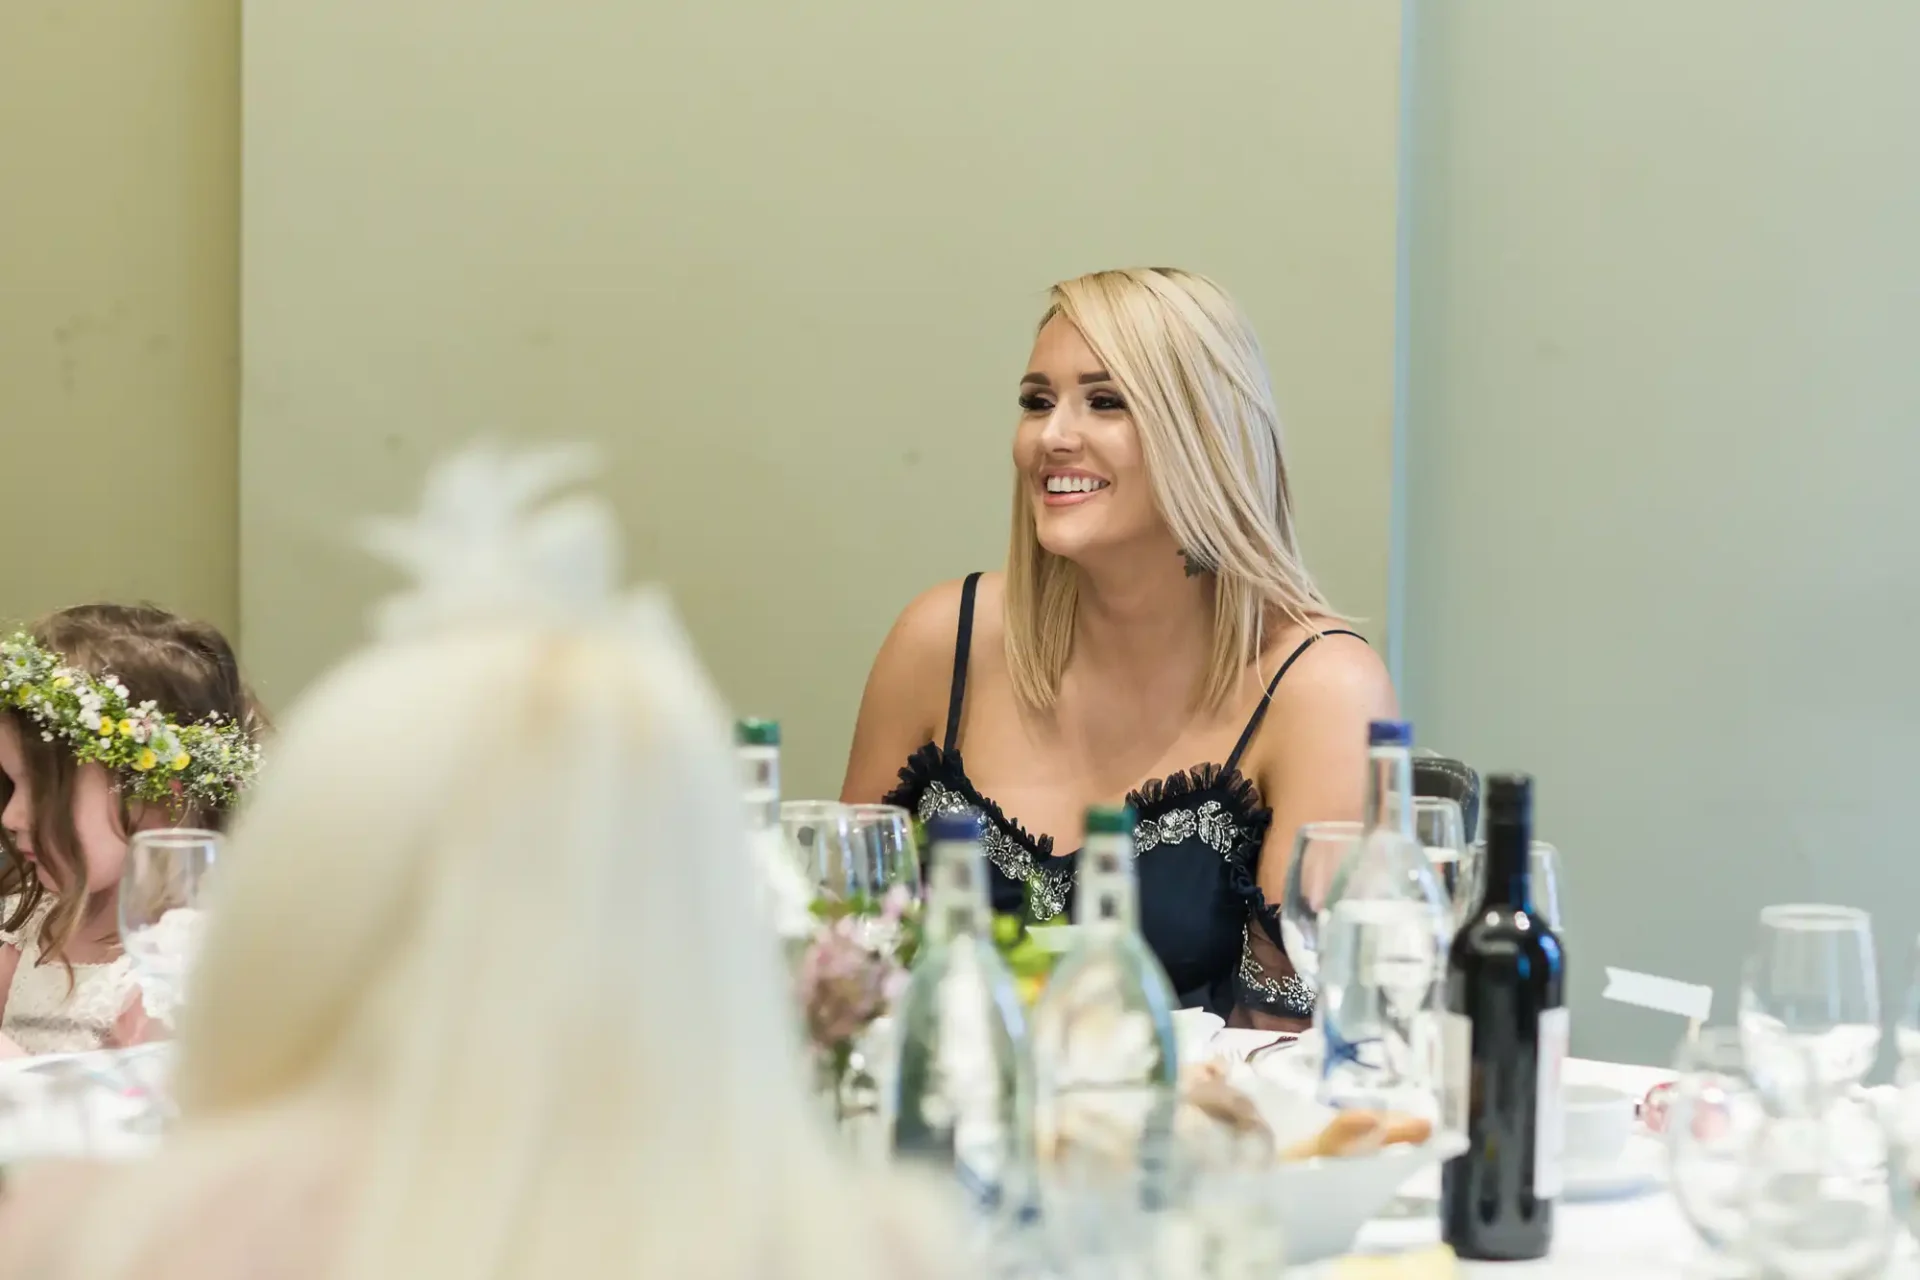 A woman with blond hair smiling at a table during a formal event, surrounded by wine glasses and guests.